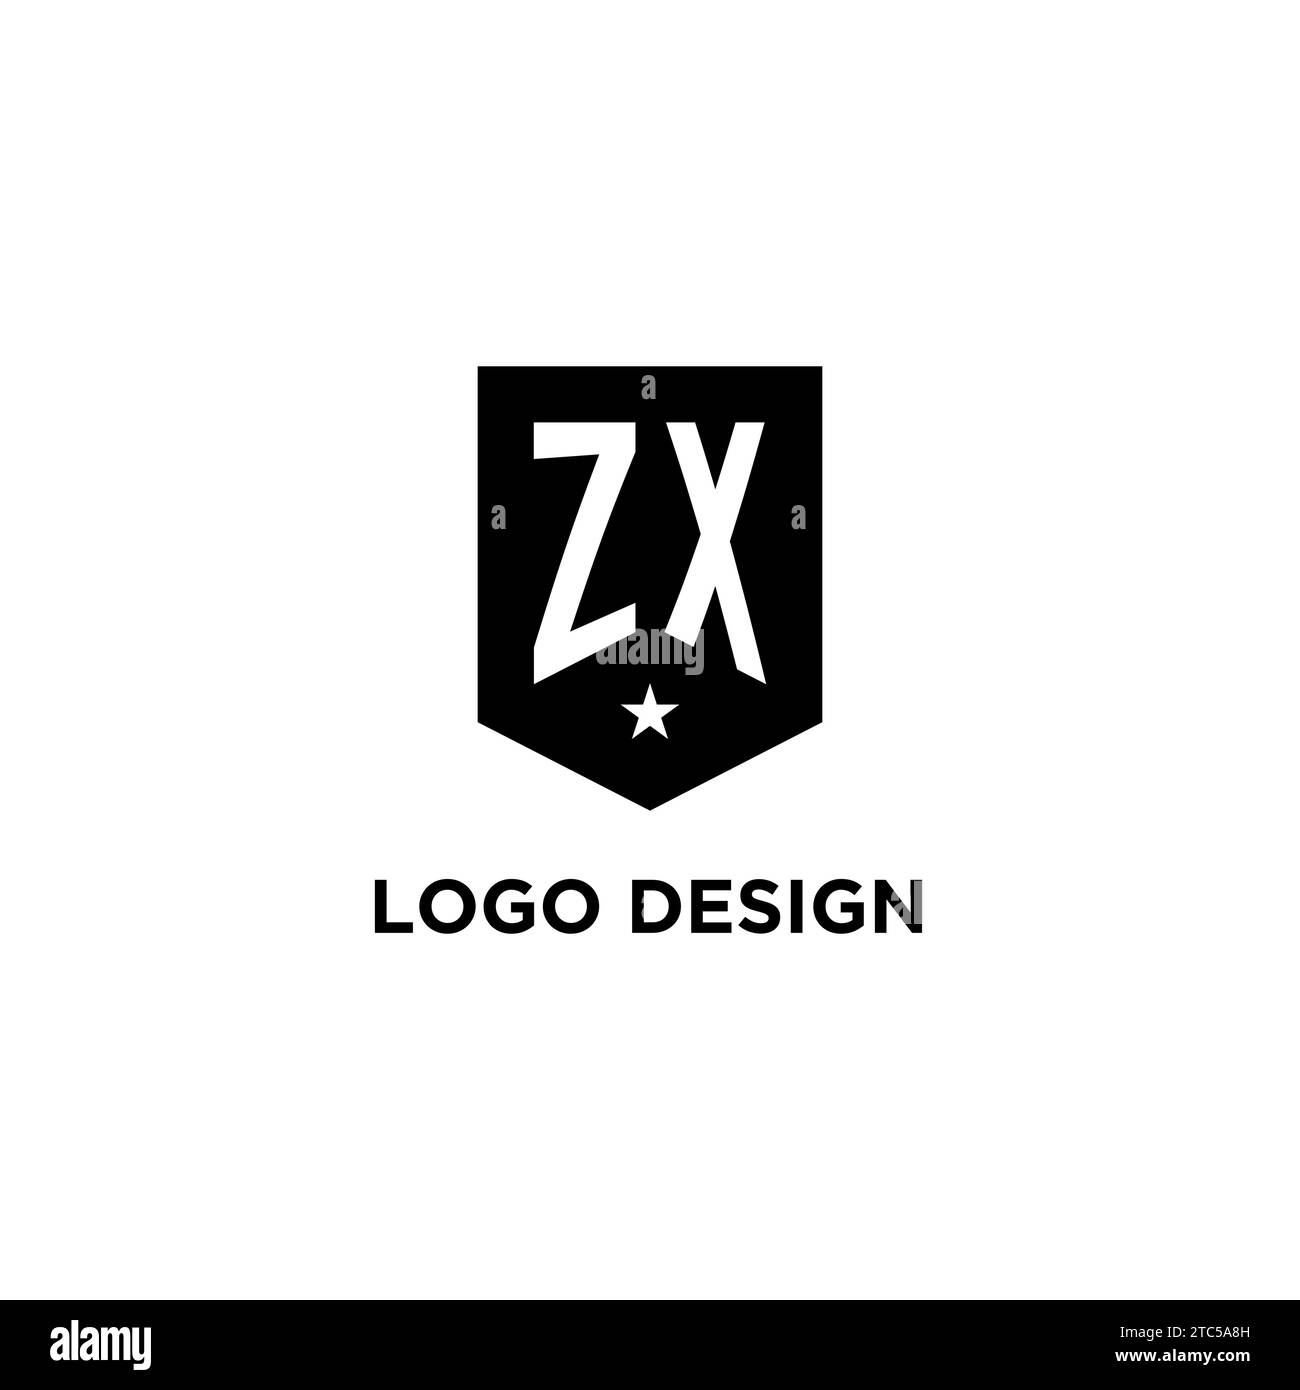 ZX monogram initial logo with geometric shield and star icon design style ideas Stock Vector